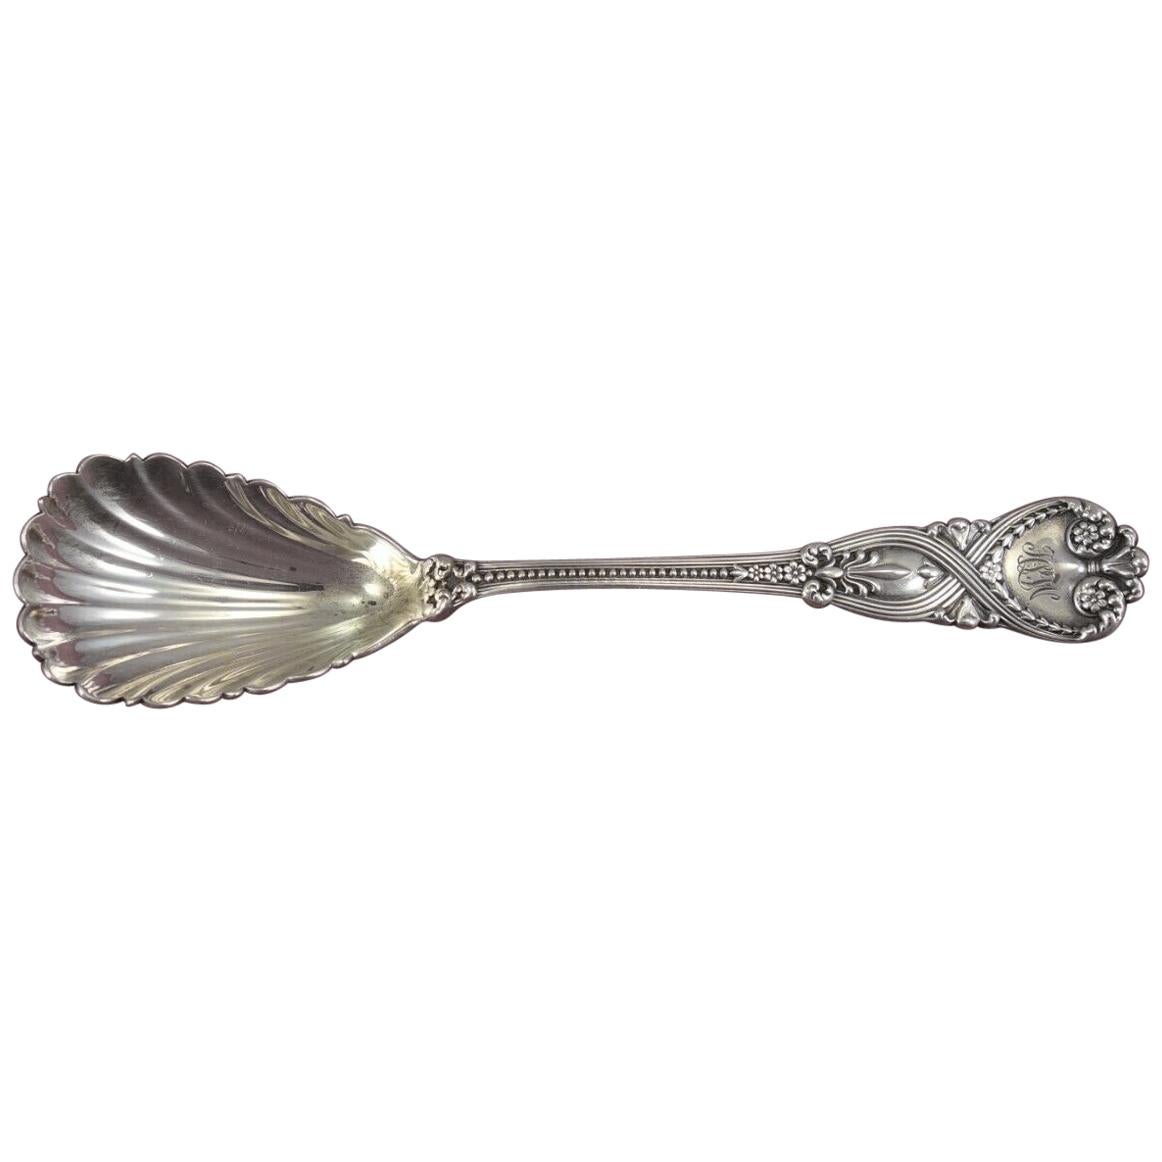 Saint James by Tiffany & Co. Sterling Silver Preserve Spoon Shell Bowl